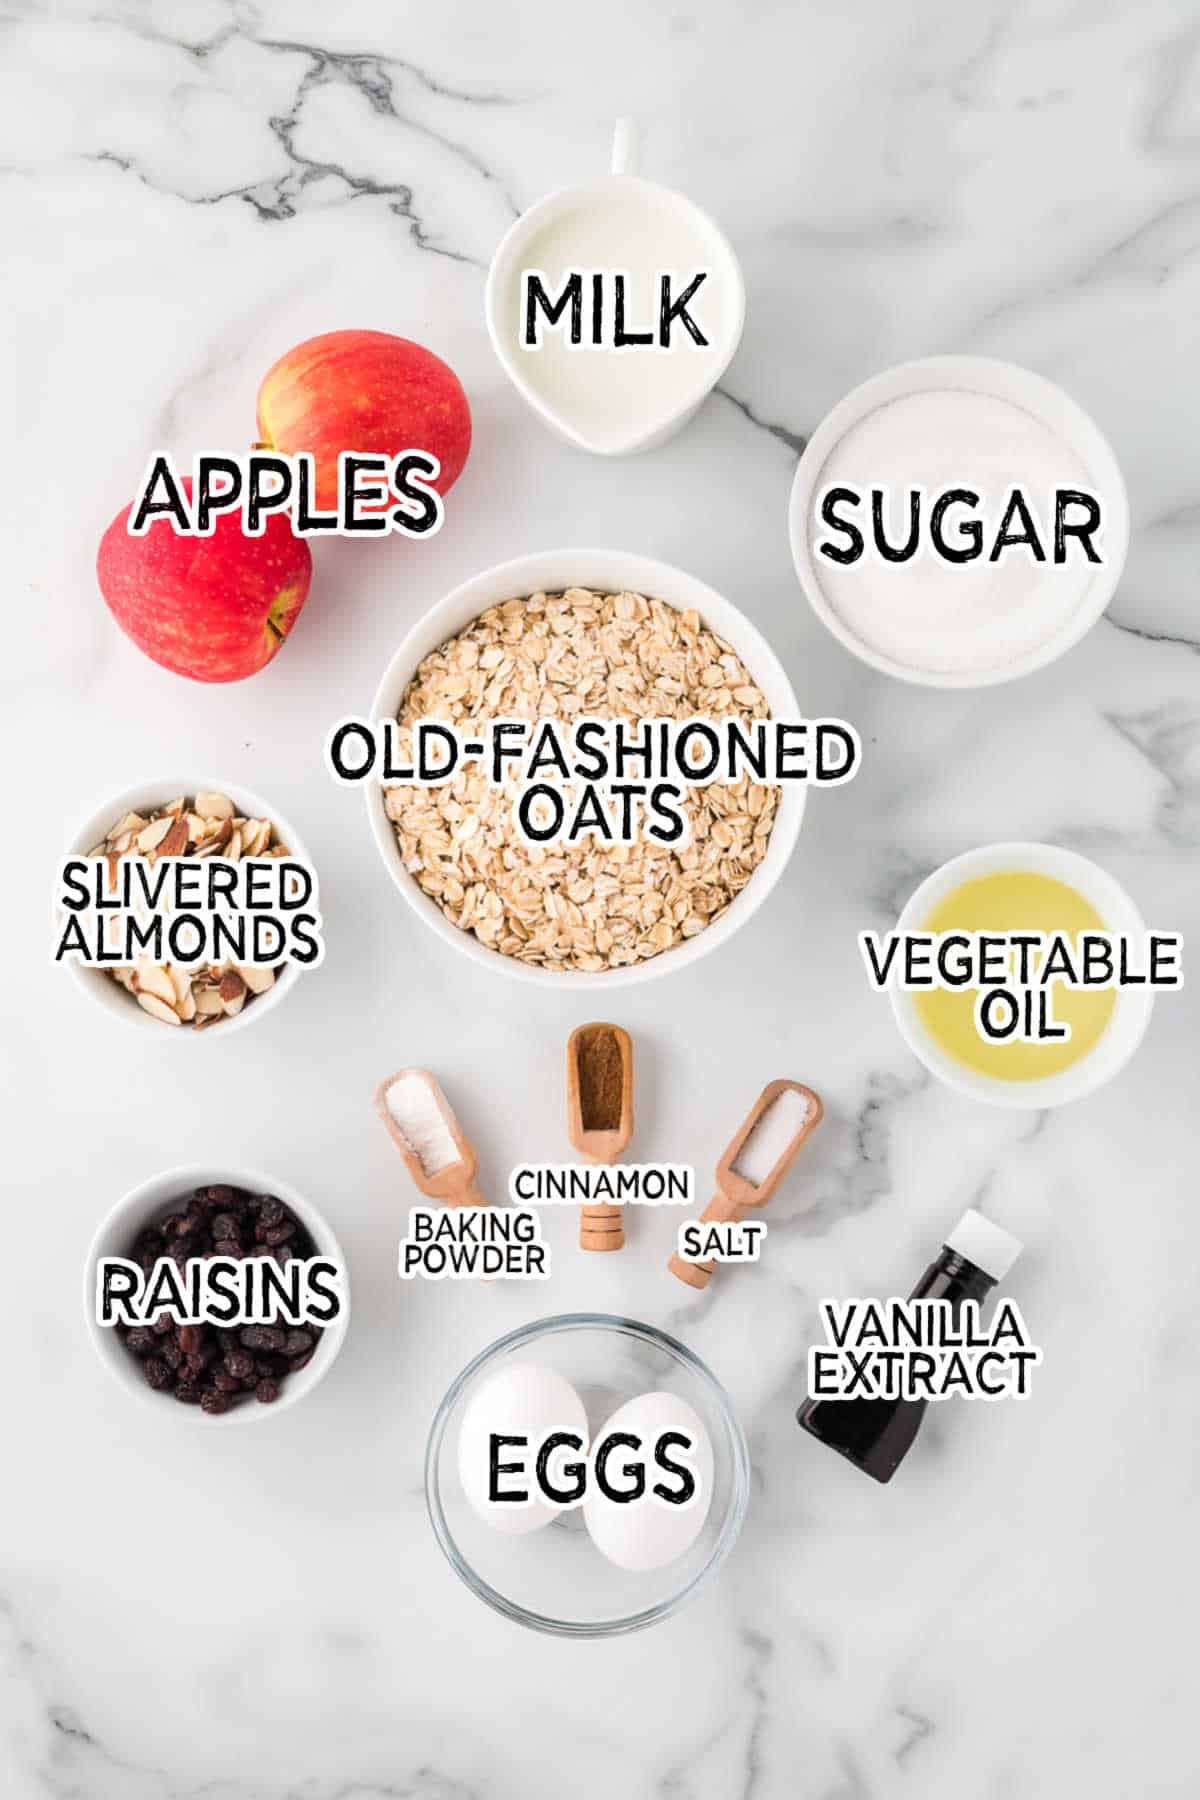 Baked oatmeal ingredients.